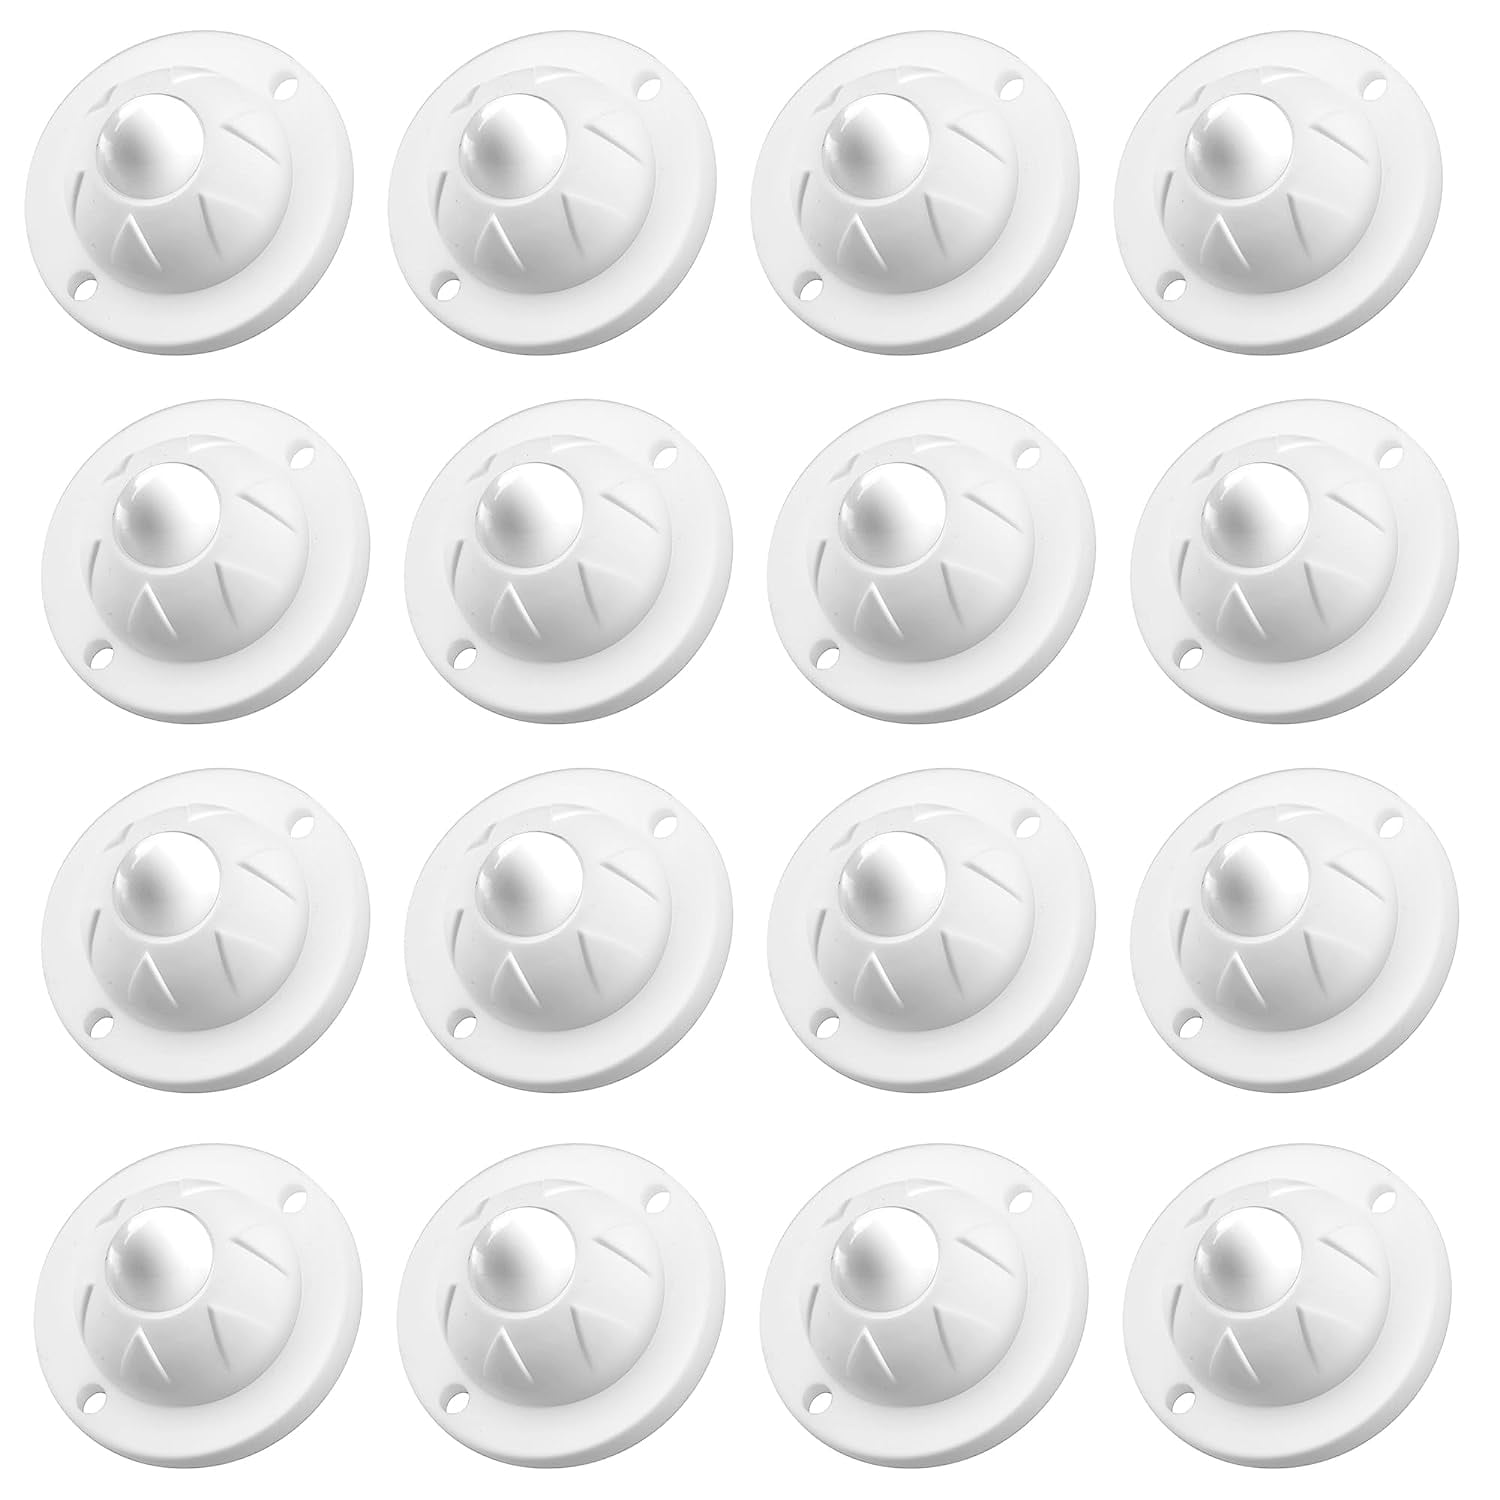 MeyaGo 16PCS Mini Caster Wheels Adhesive Bumpers for KitchenAid Mixer air  Fryer Coffee Maker Bottom Kitchen Countertops Appliances Rubber Pads